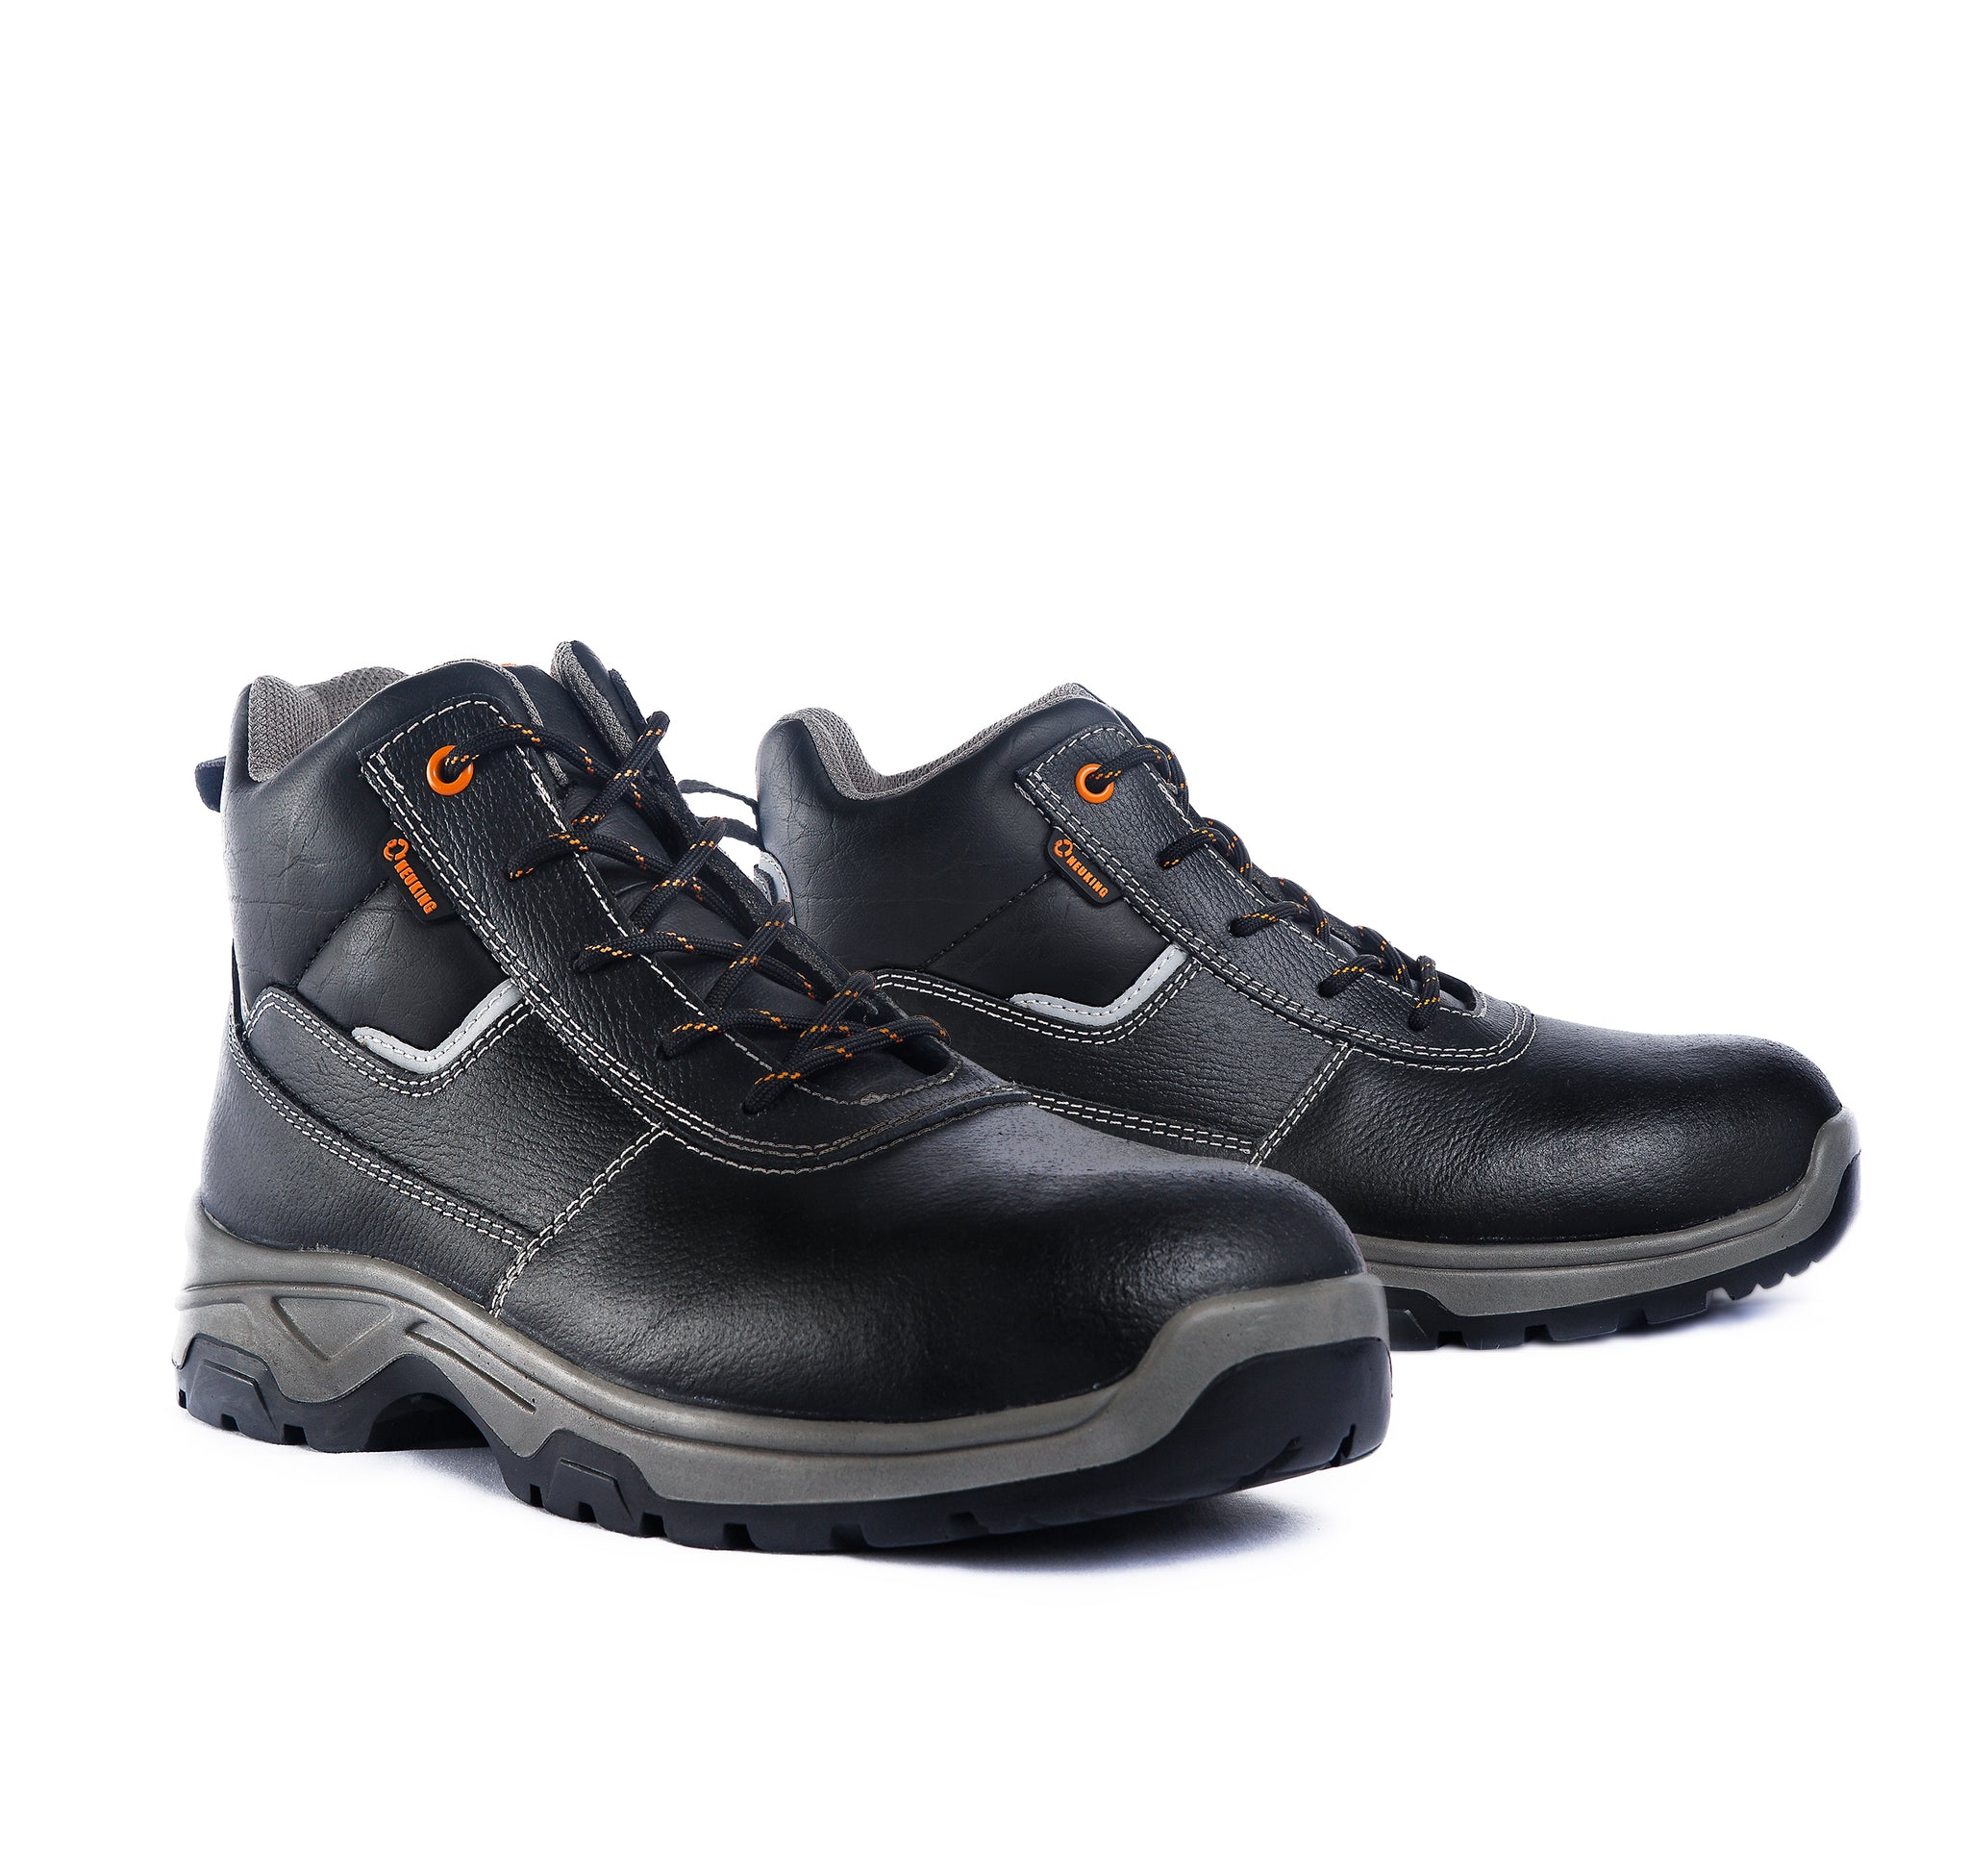 NK83 - High Cut Safety Shoes With Steel 